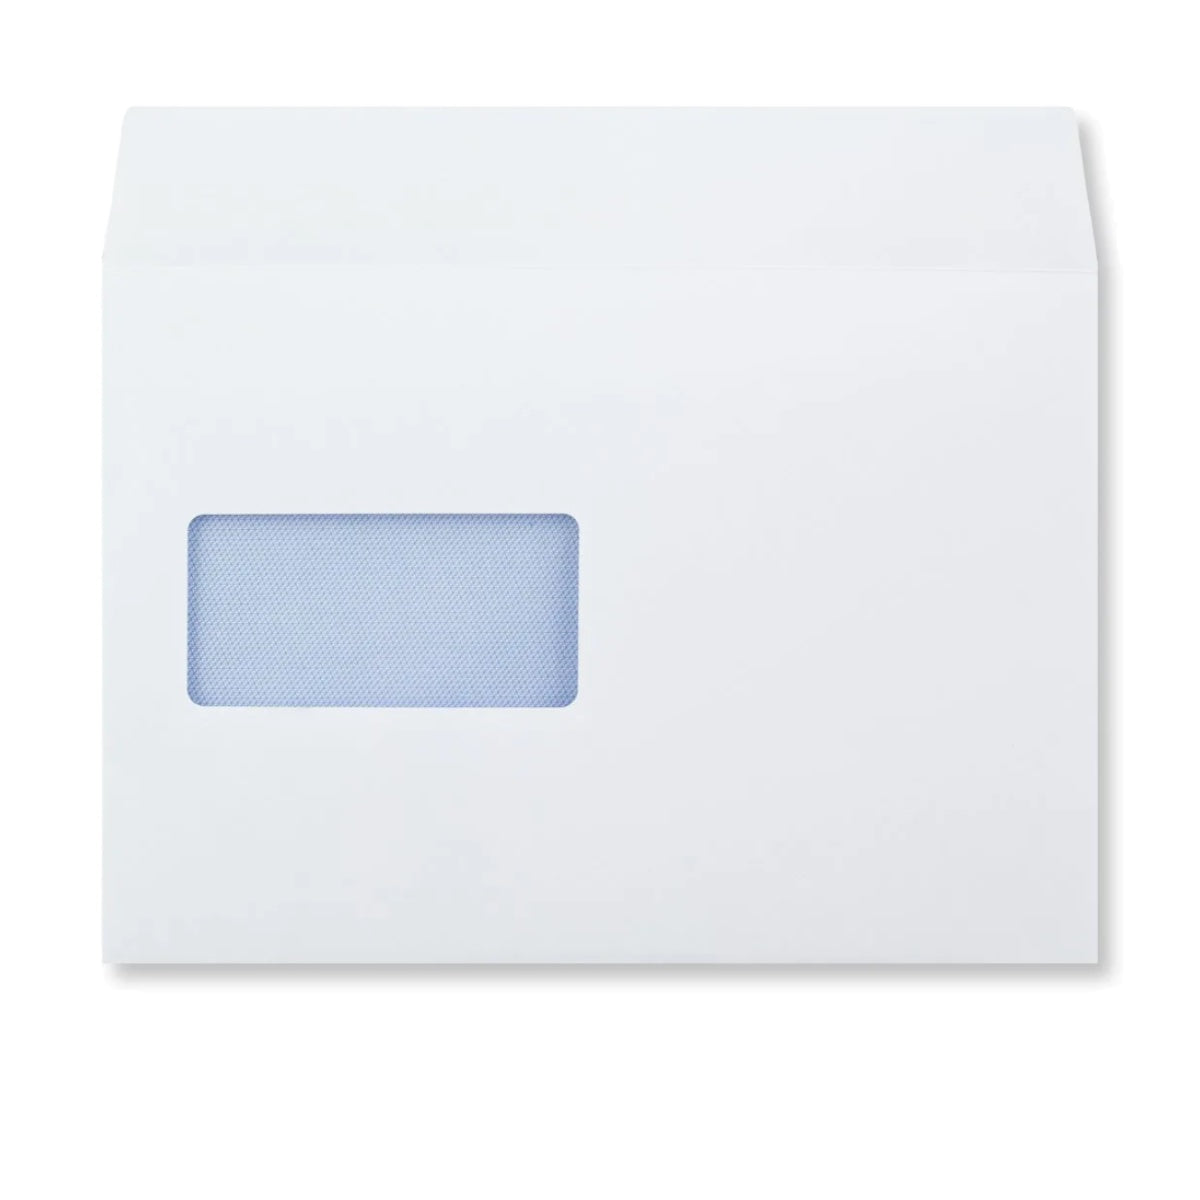 Hispapel Envelope 162 x 229 mm, 6 x 9 inches, C5 with window, 90gsm, White